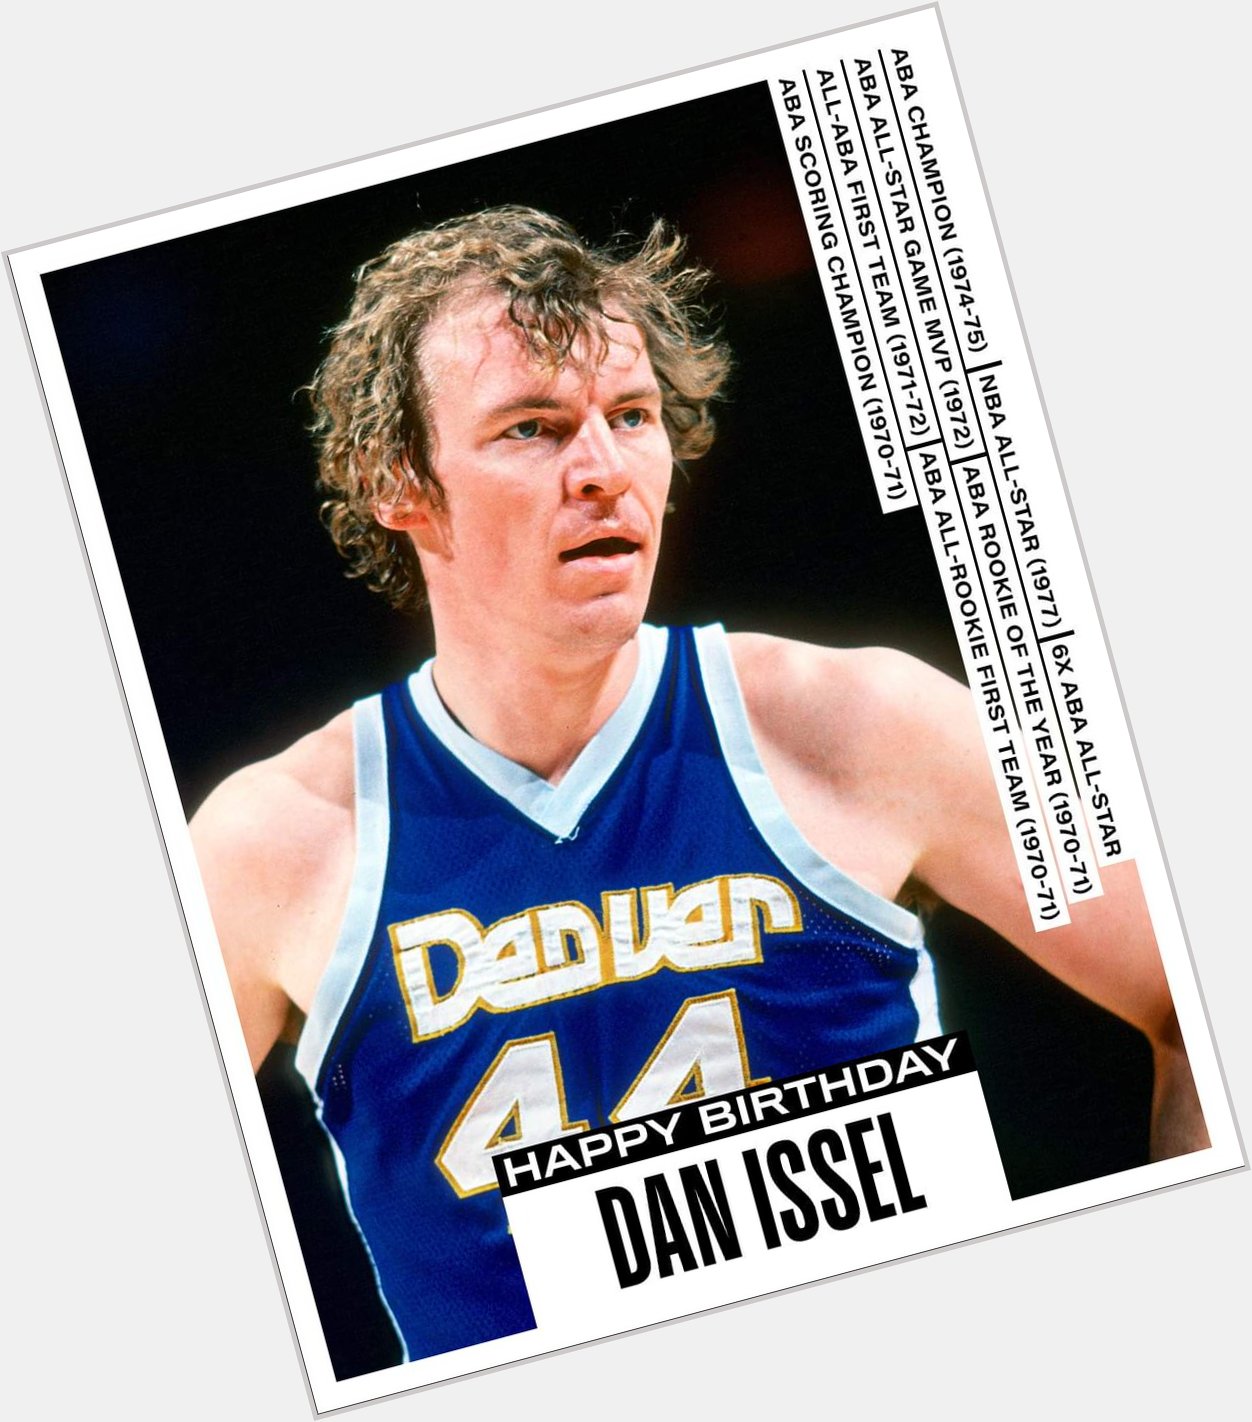 Join us in wishing a Happy 74th Birthday to 7x All-Star and Hall of Fame inductee, Dan Issel! 